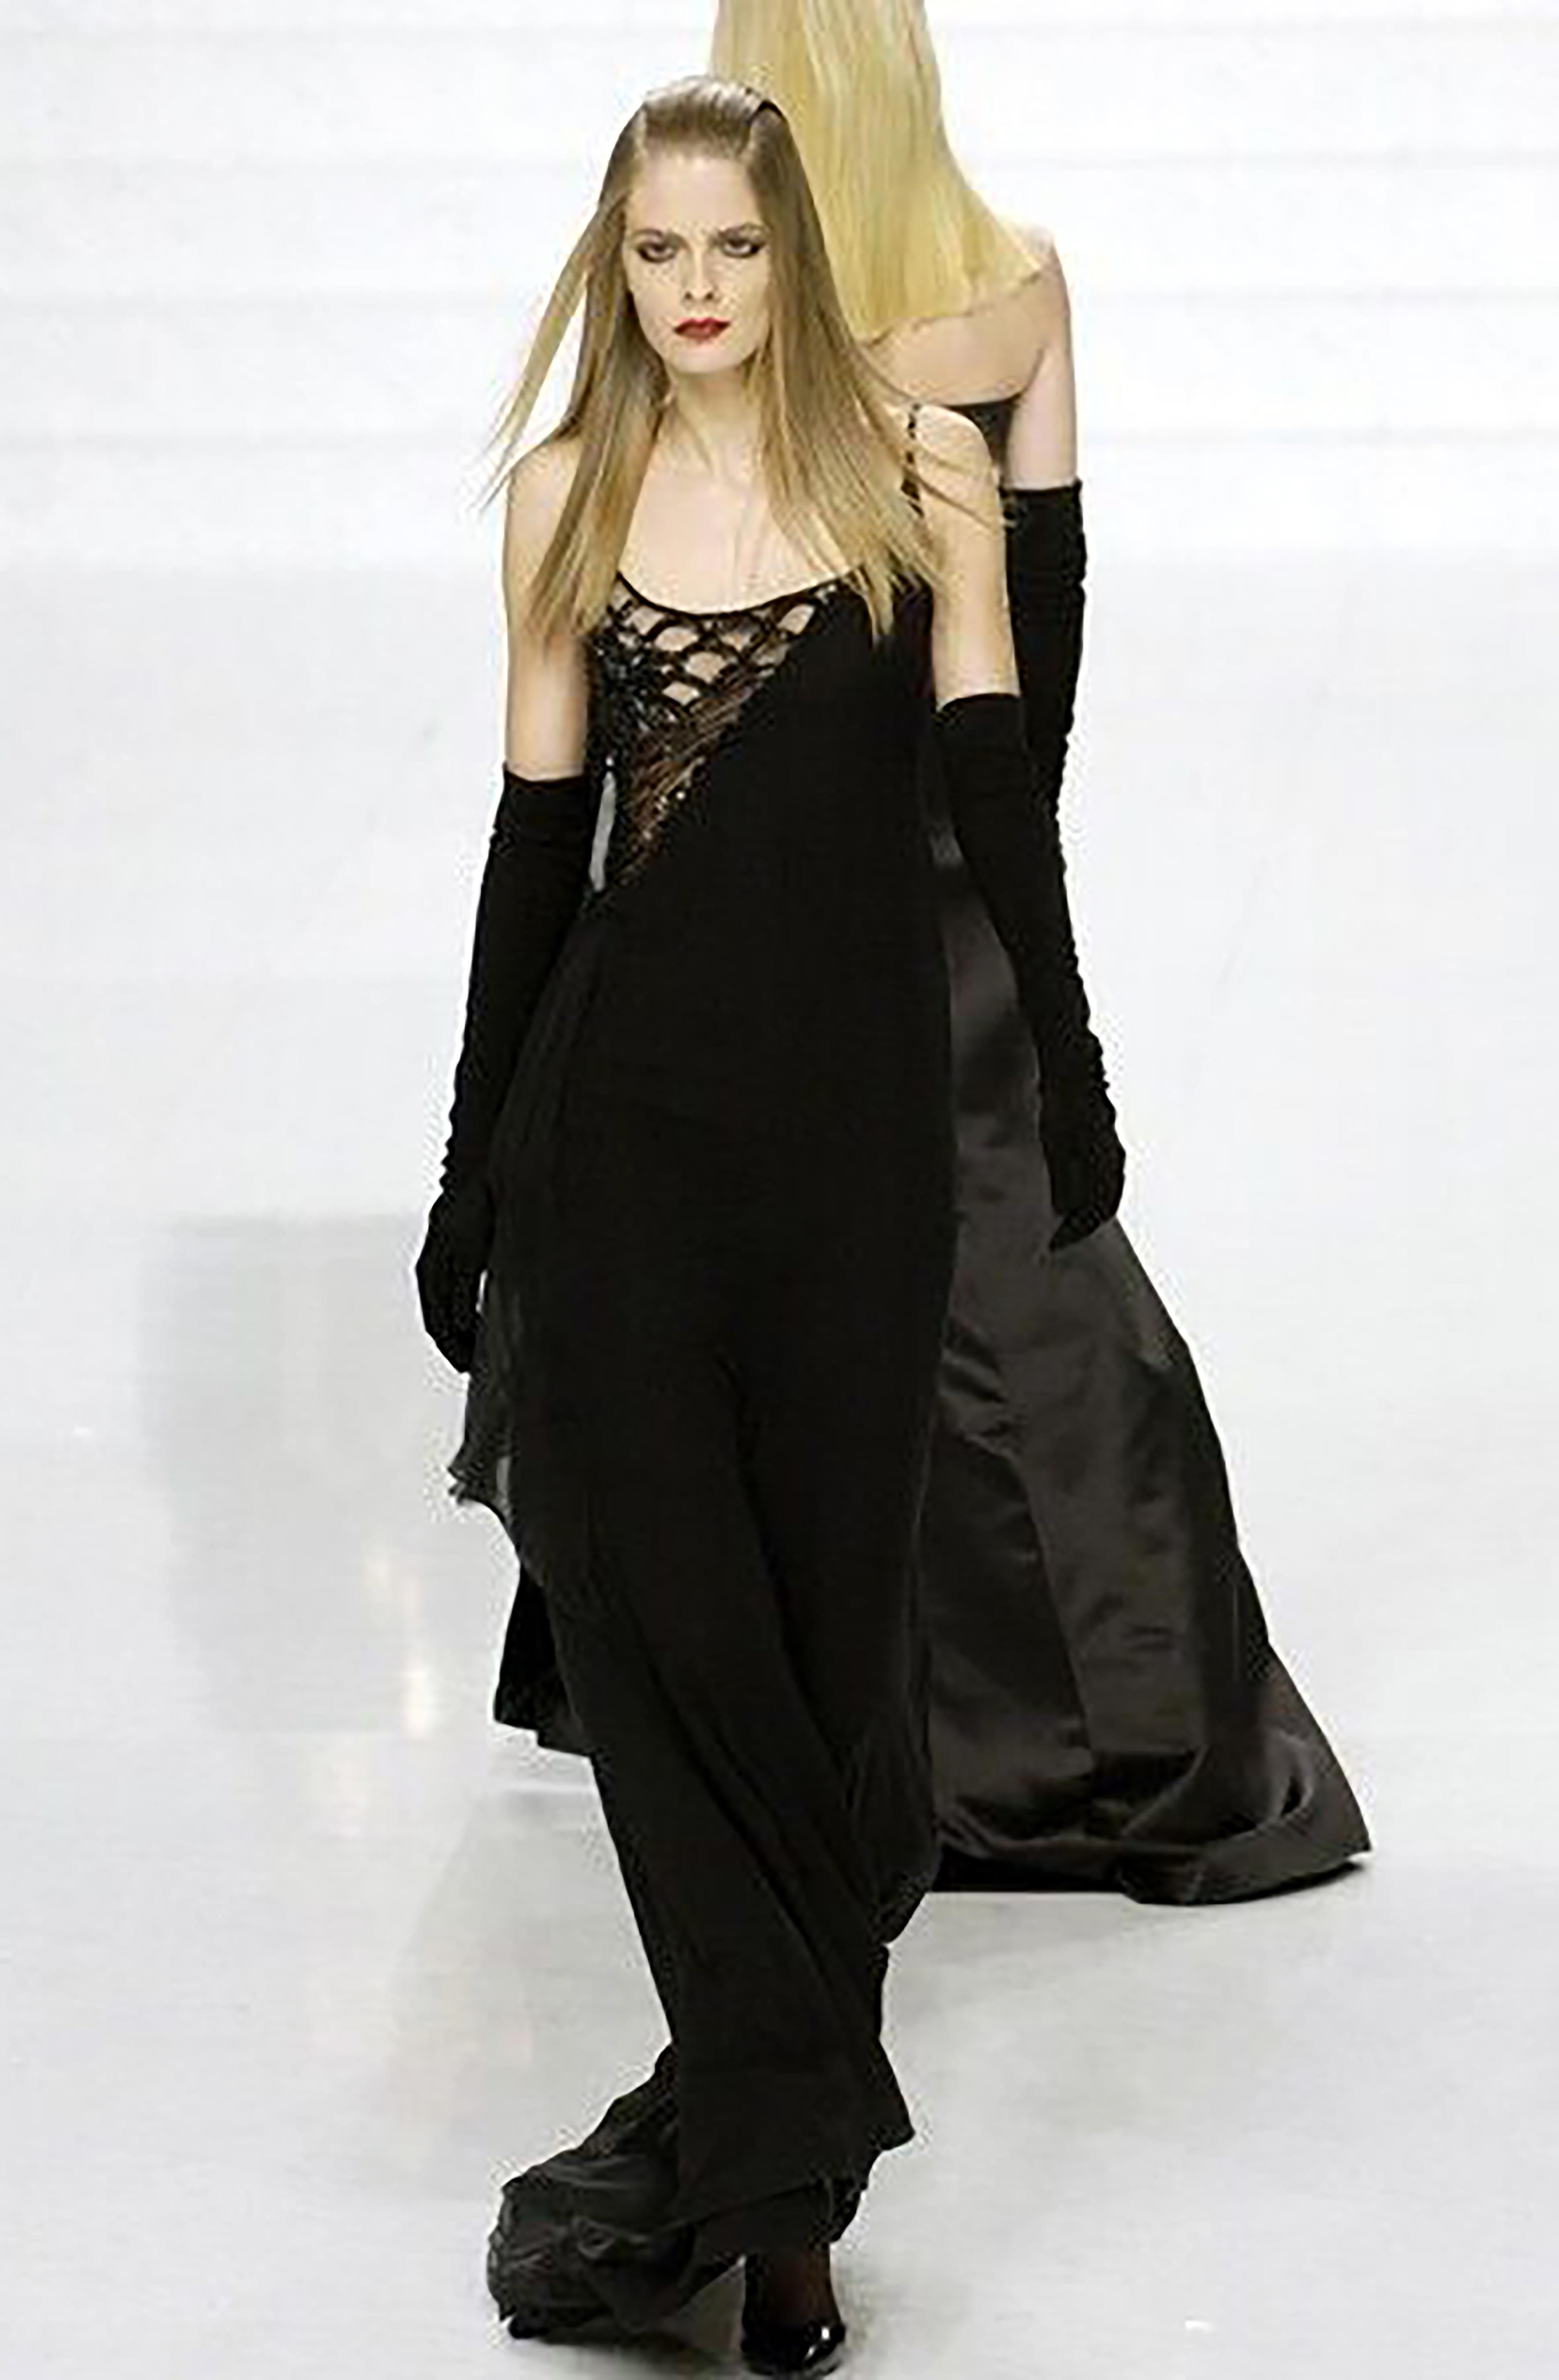 A/W 2006 Valentino black silk embellished floral asymmetrical gown. Heavily embellished silk crepe sleeveless gown with asymmetrical floral and scalloped pattern semi-sheer mesh bust and sides. Black drape paneling around right side. Low back with